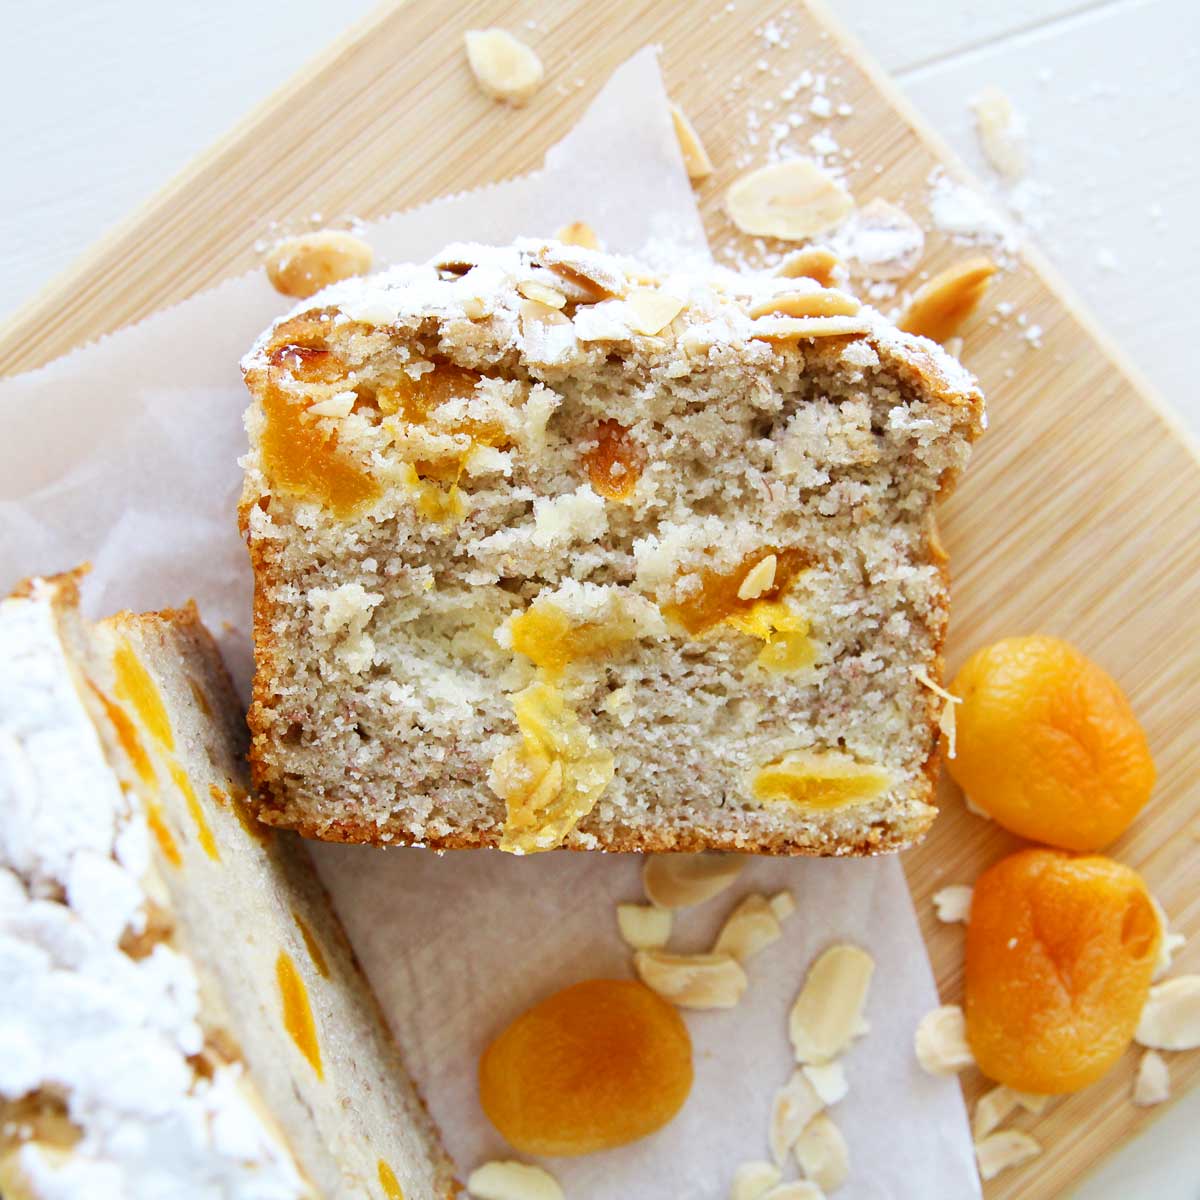 Simply Divine: Moist Vegan Almond Banana Bread with Apricots (Eggless, Dairy Free!) - Almond Banana Bread